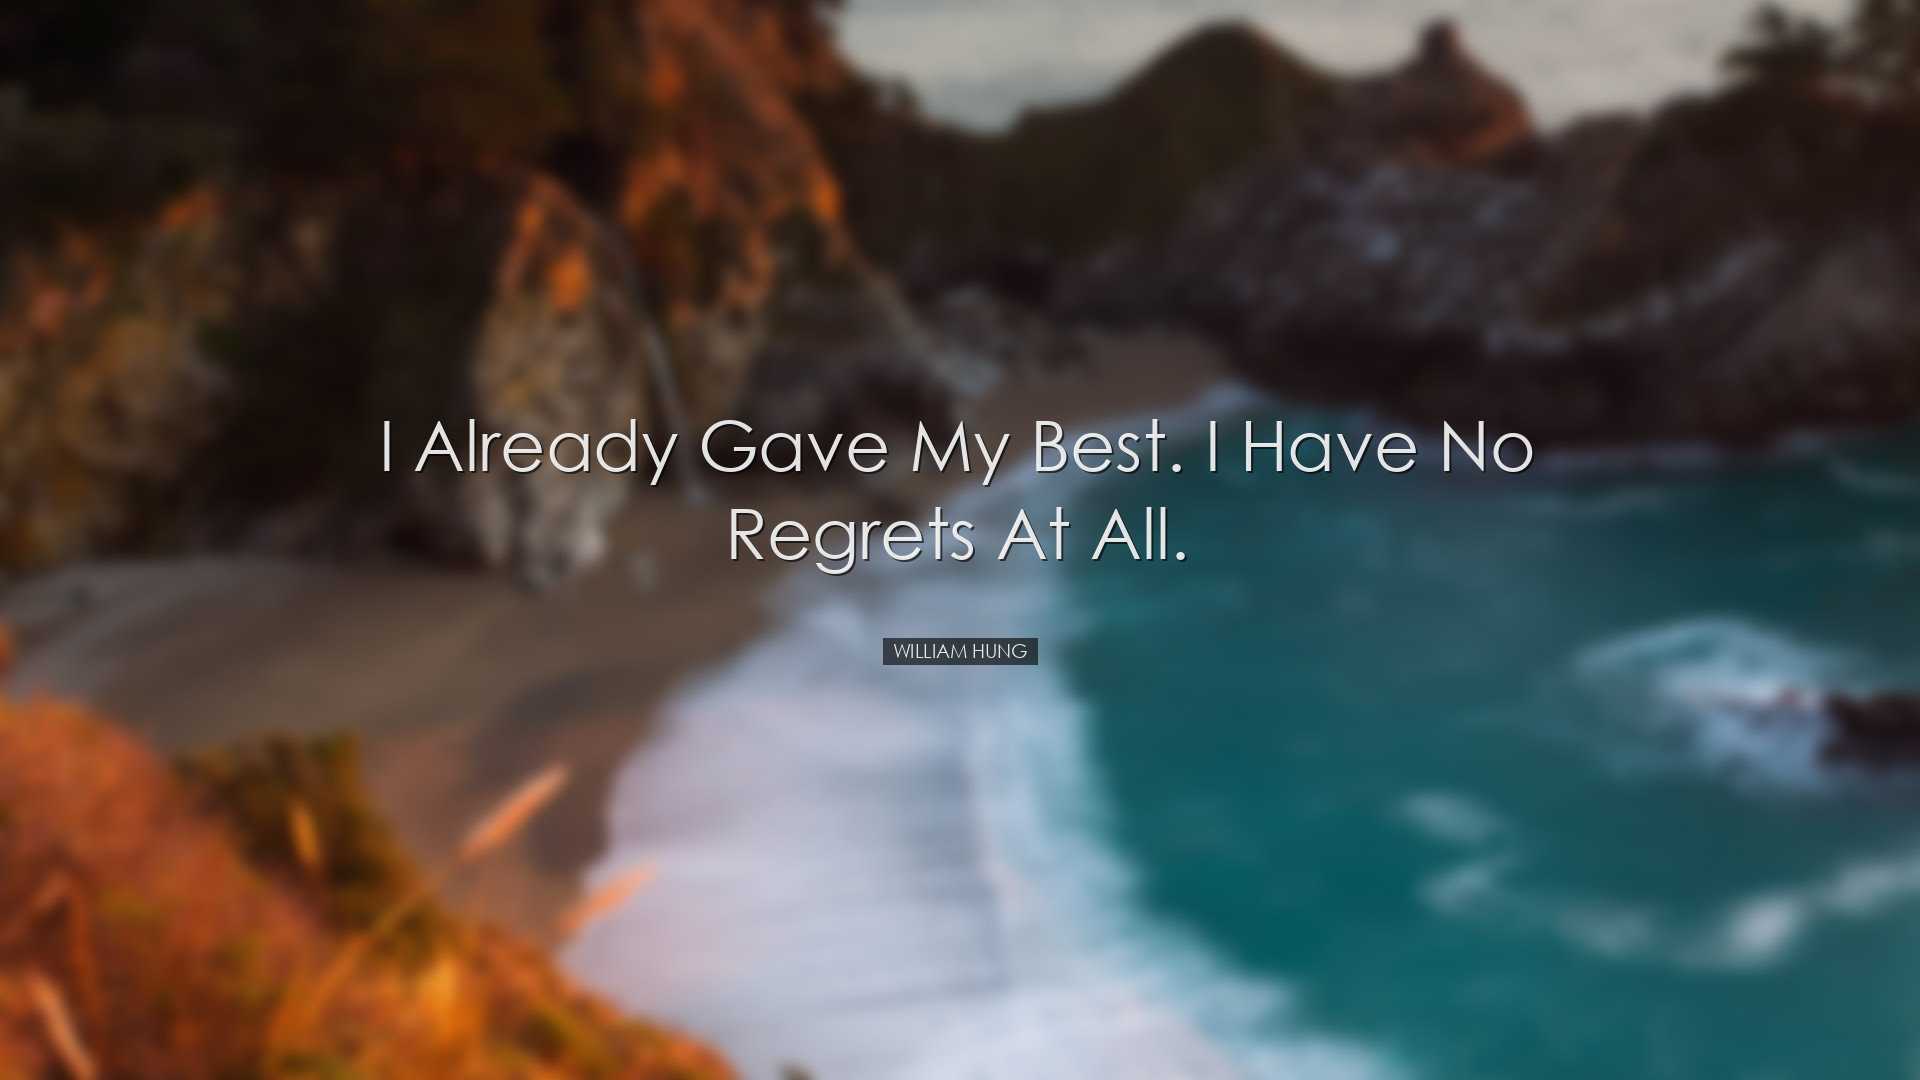 I already gave my best. I have no regrets at all. - William Hung